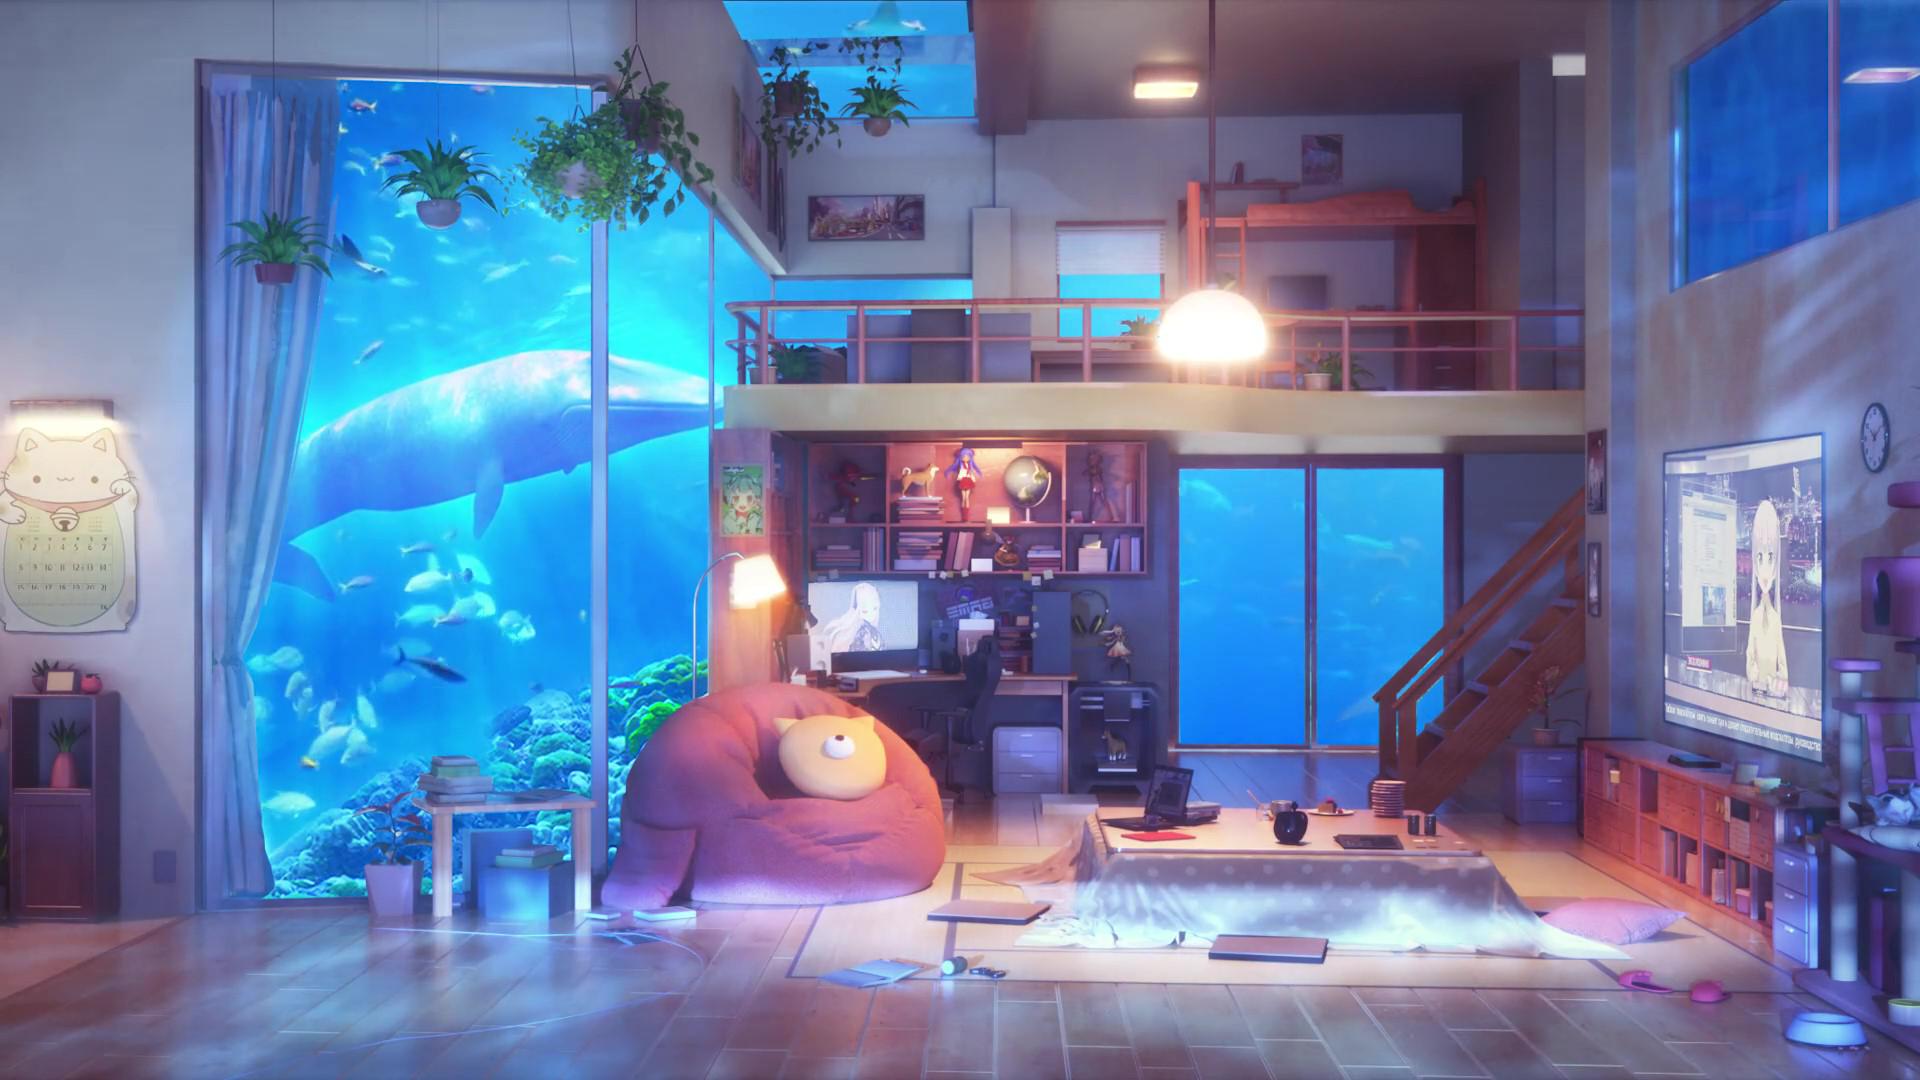 Underwater Condo Anime. Live Wallpaper [1920 x 1080] (Animation Link in Comments)